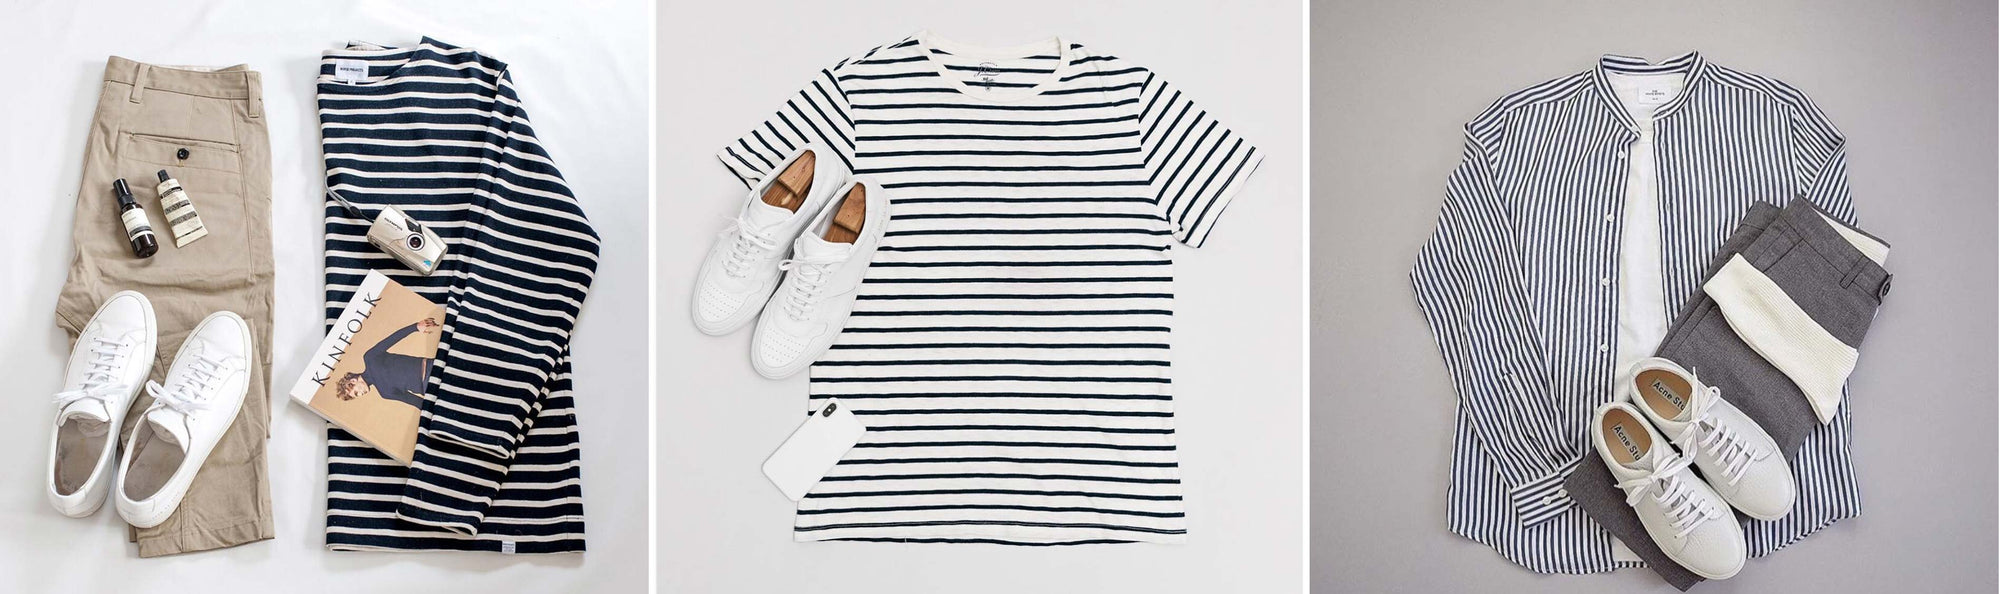 STYLE GUIDE: STRIPES